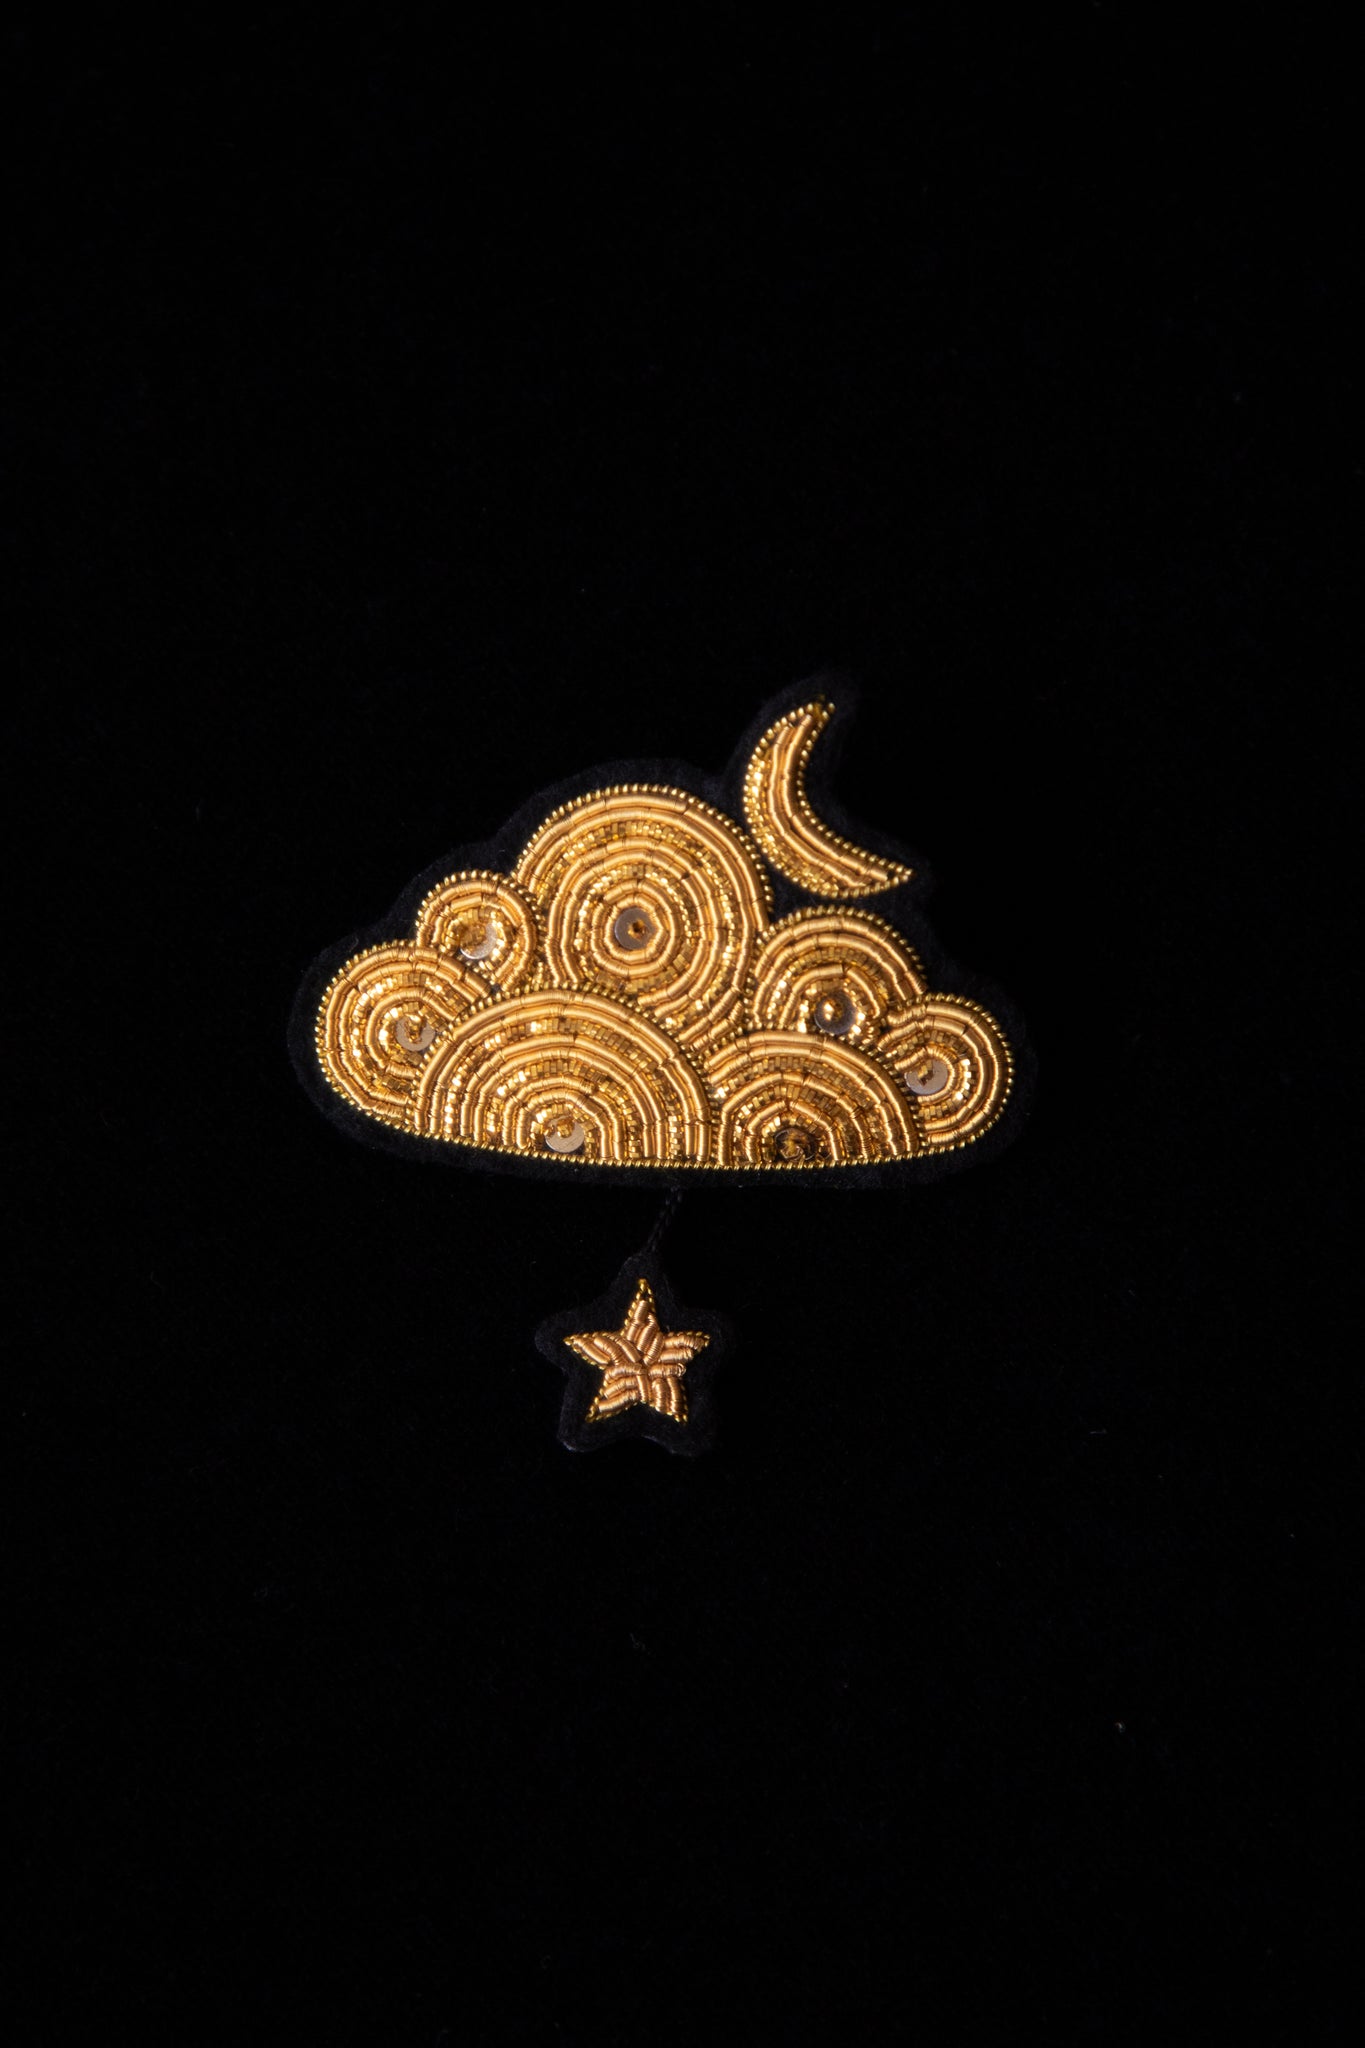 Embroidered Pins- Celestial & Weather